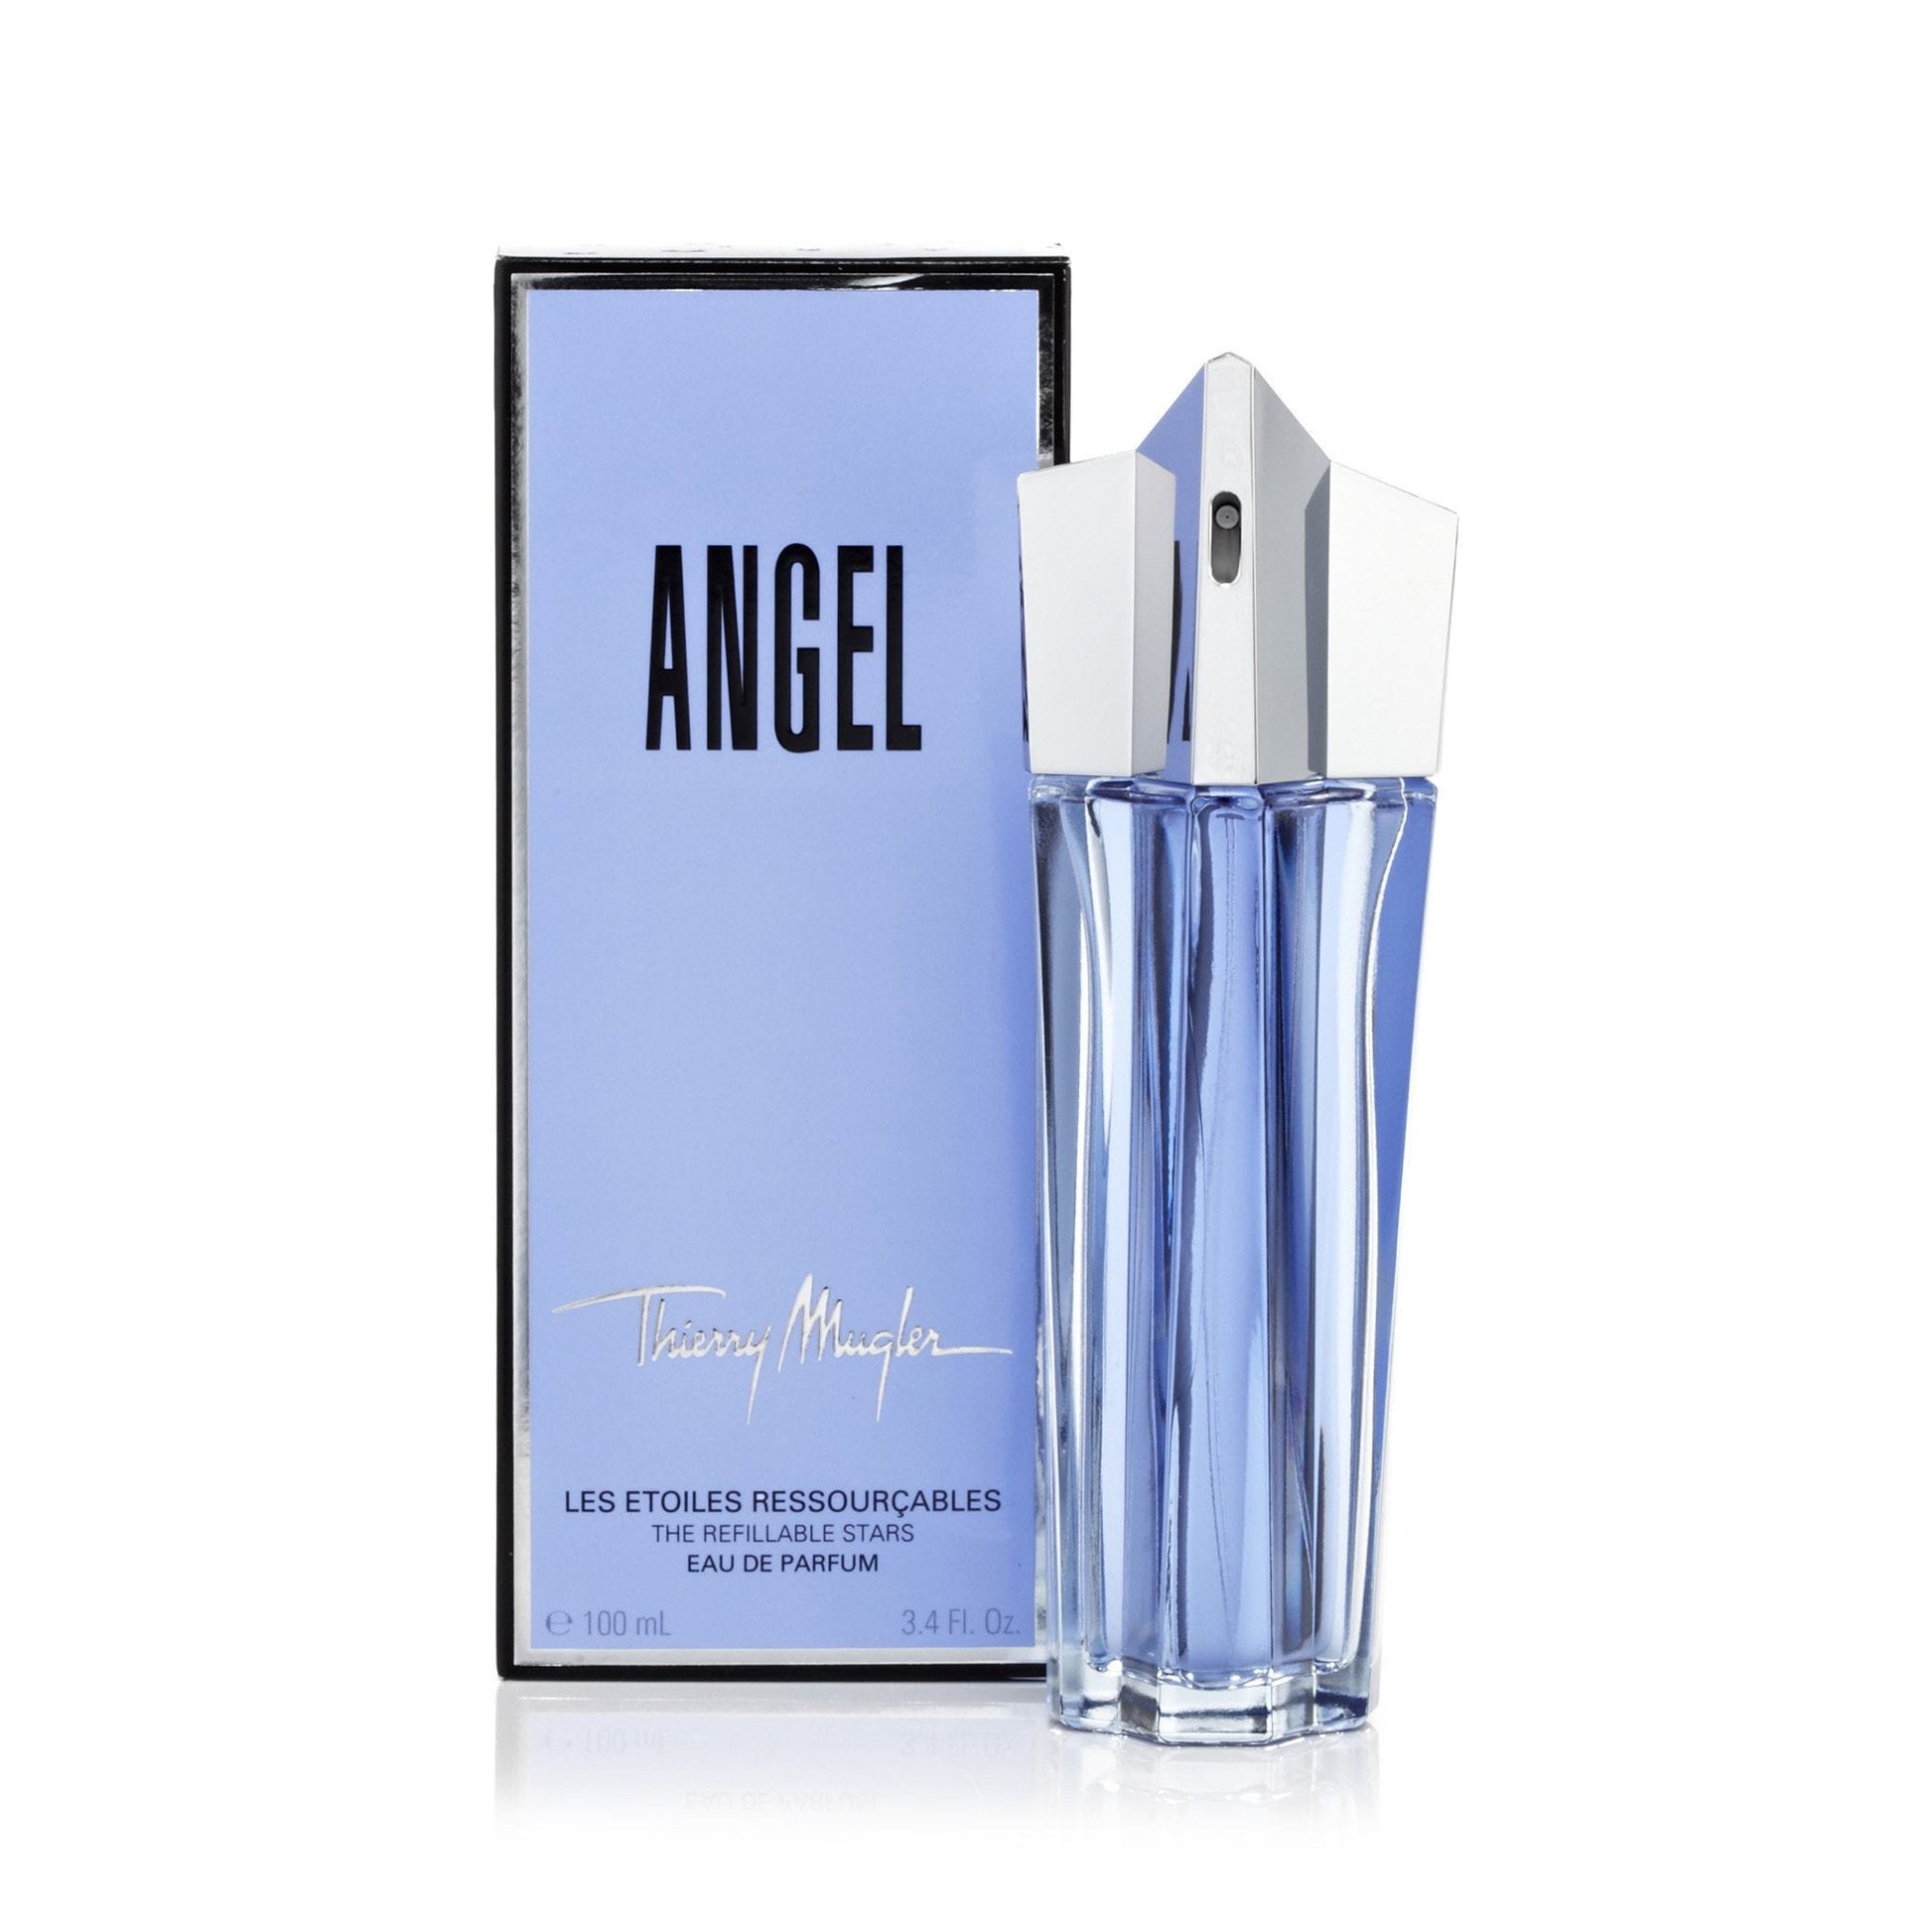 Angel Refillable Eau de Parfum Spray for Women by Thierry Mugler, Product image 1